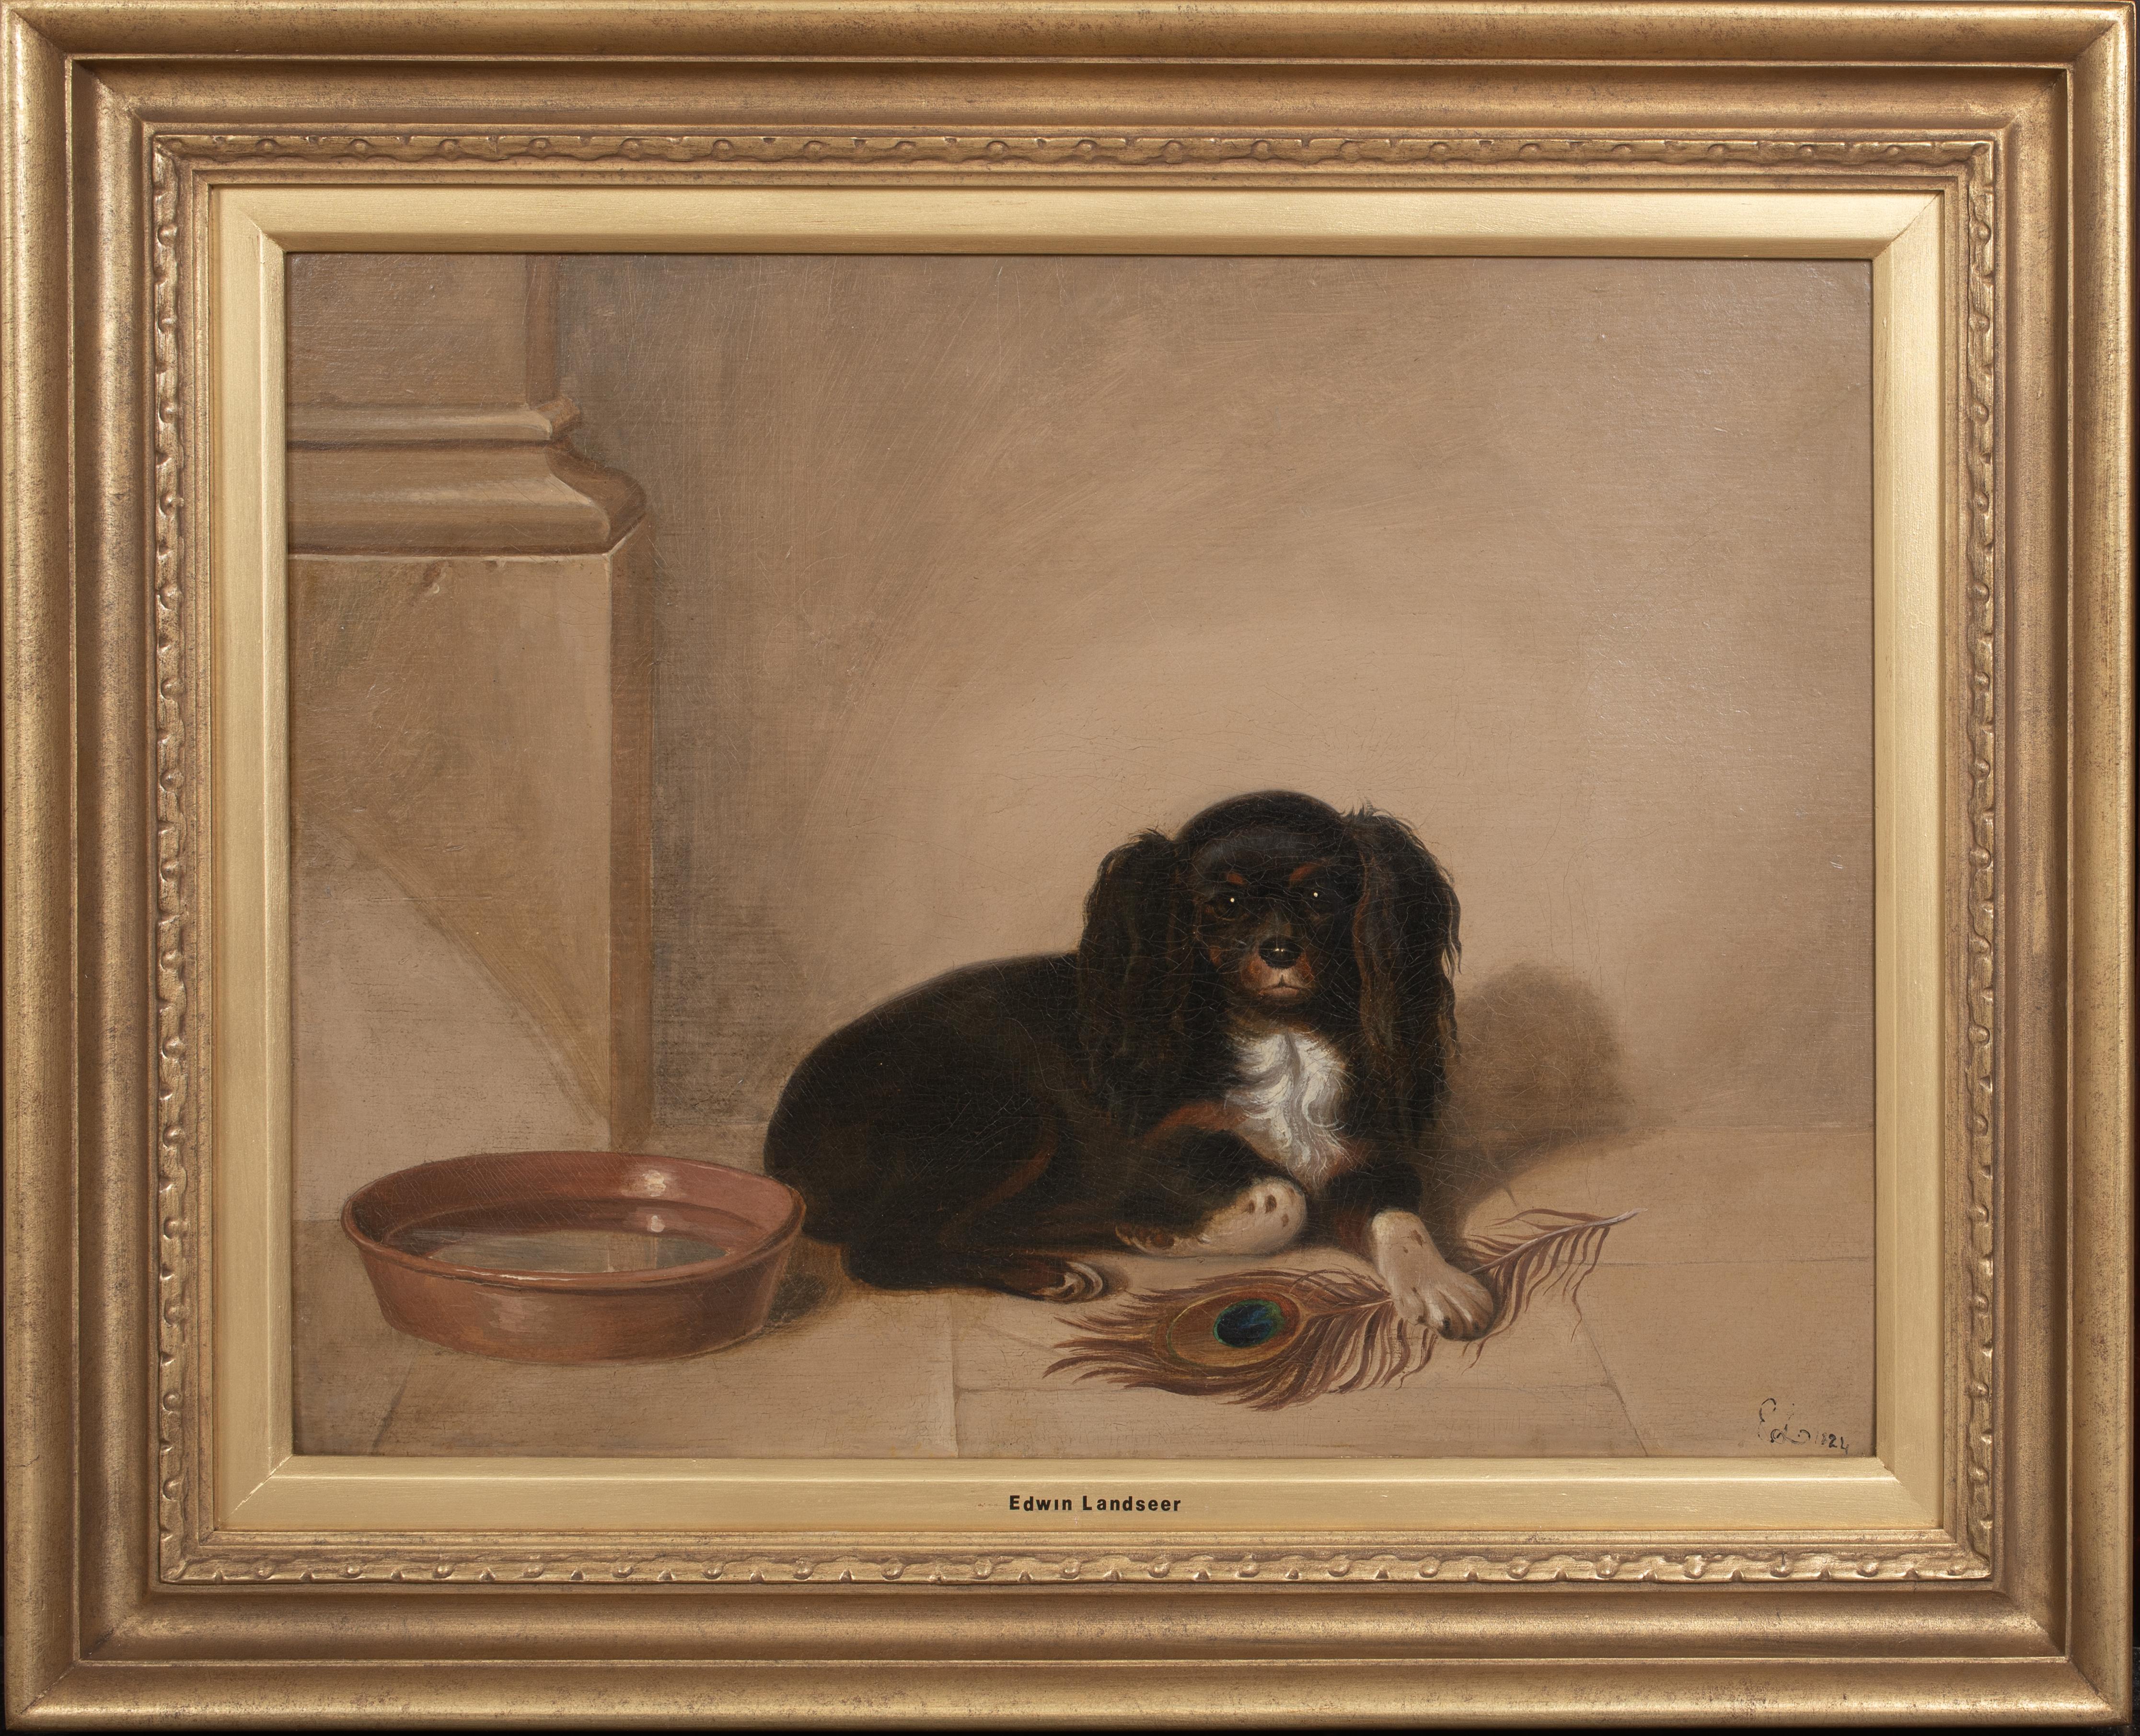 Unknown Animal Painting - Portrait Of A King Charles Spaniel, 19th century SIR EDWARD LANDSEER (1802-1873)